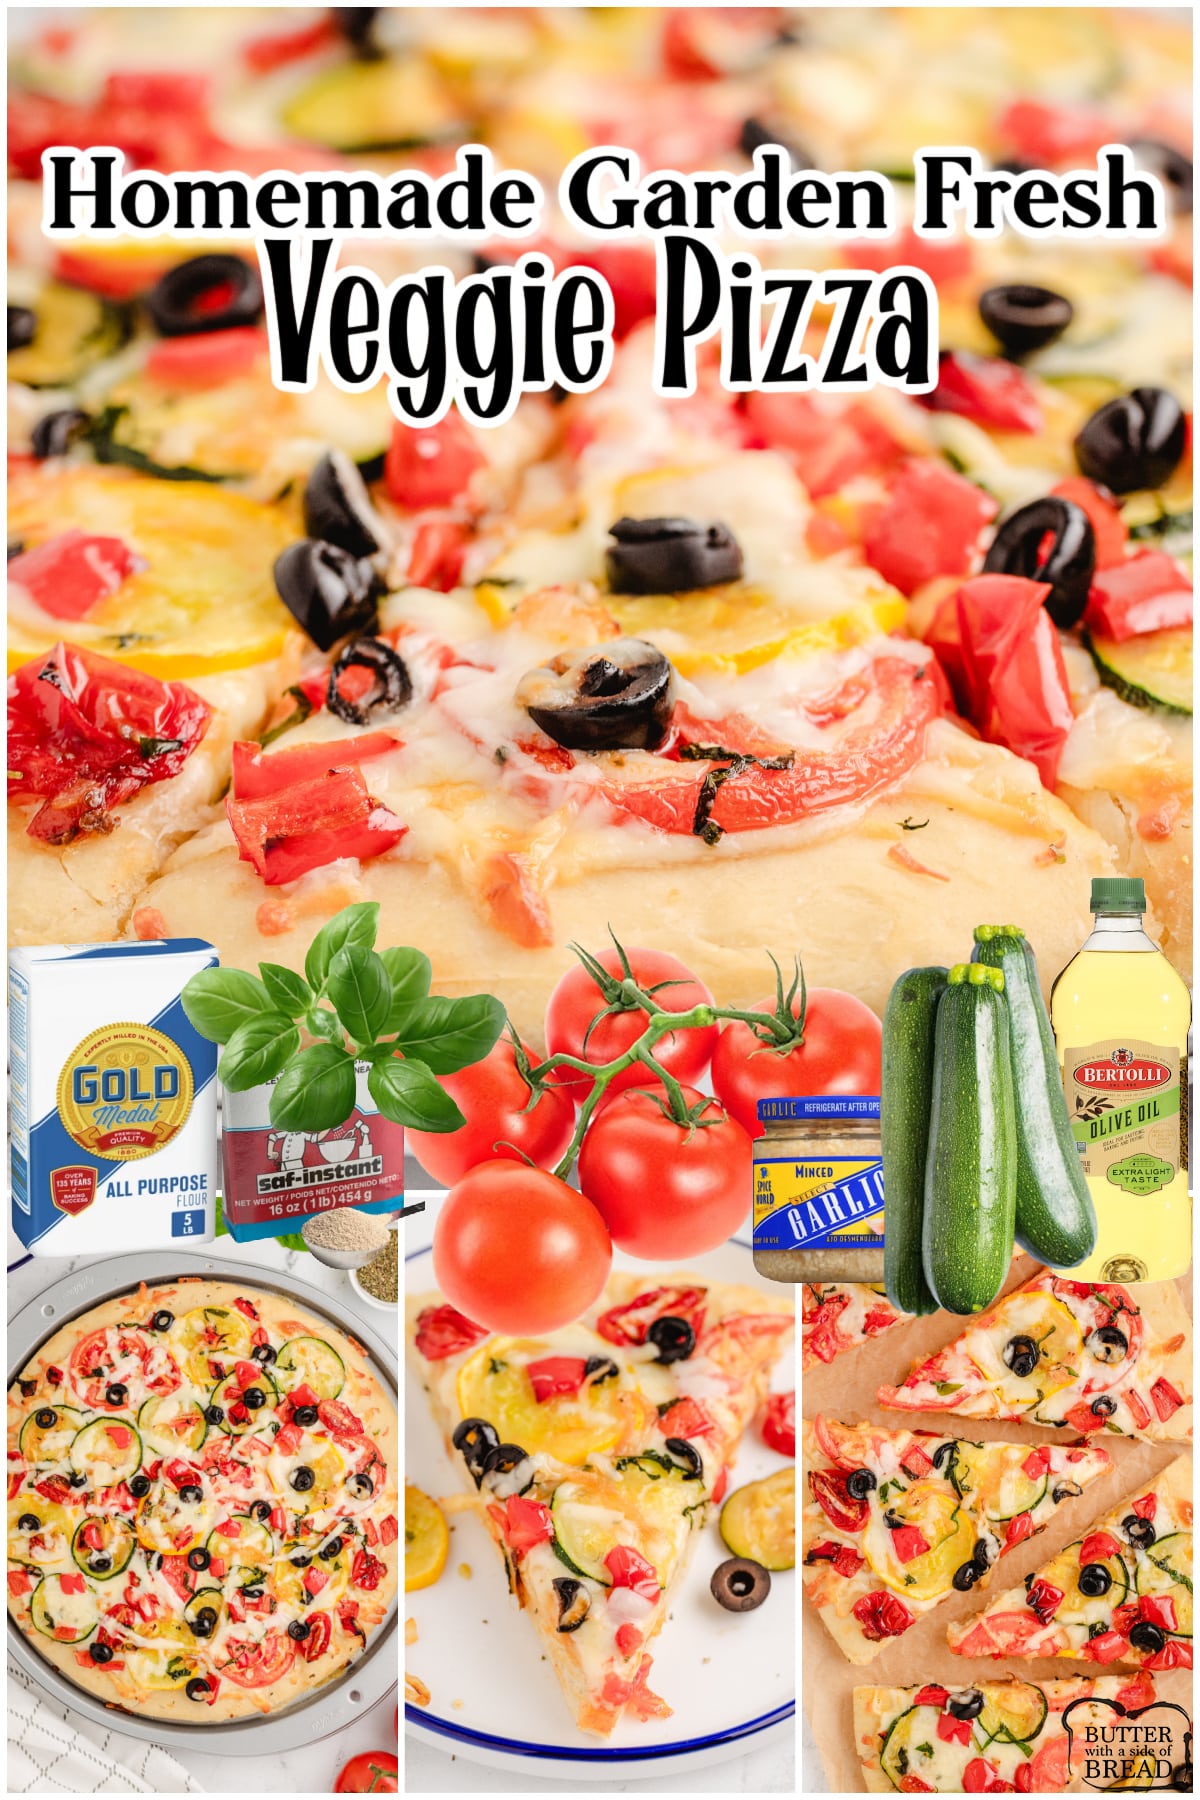 Garden Vegetable Pizza a delicious, flavorful homemade pizza that uses garden fresh veggies! Amazingly easy homemade pizza perfect with cherry tomatoes, sliced zucchini, fresh basil and more!